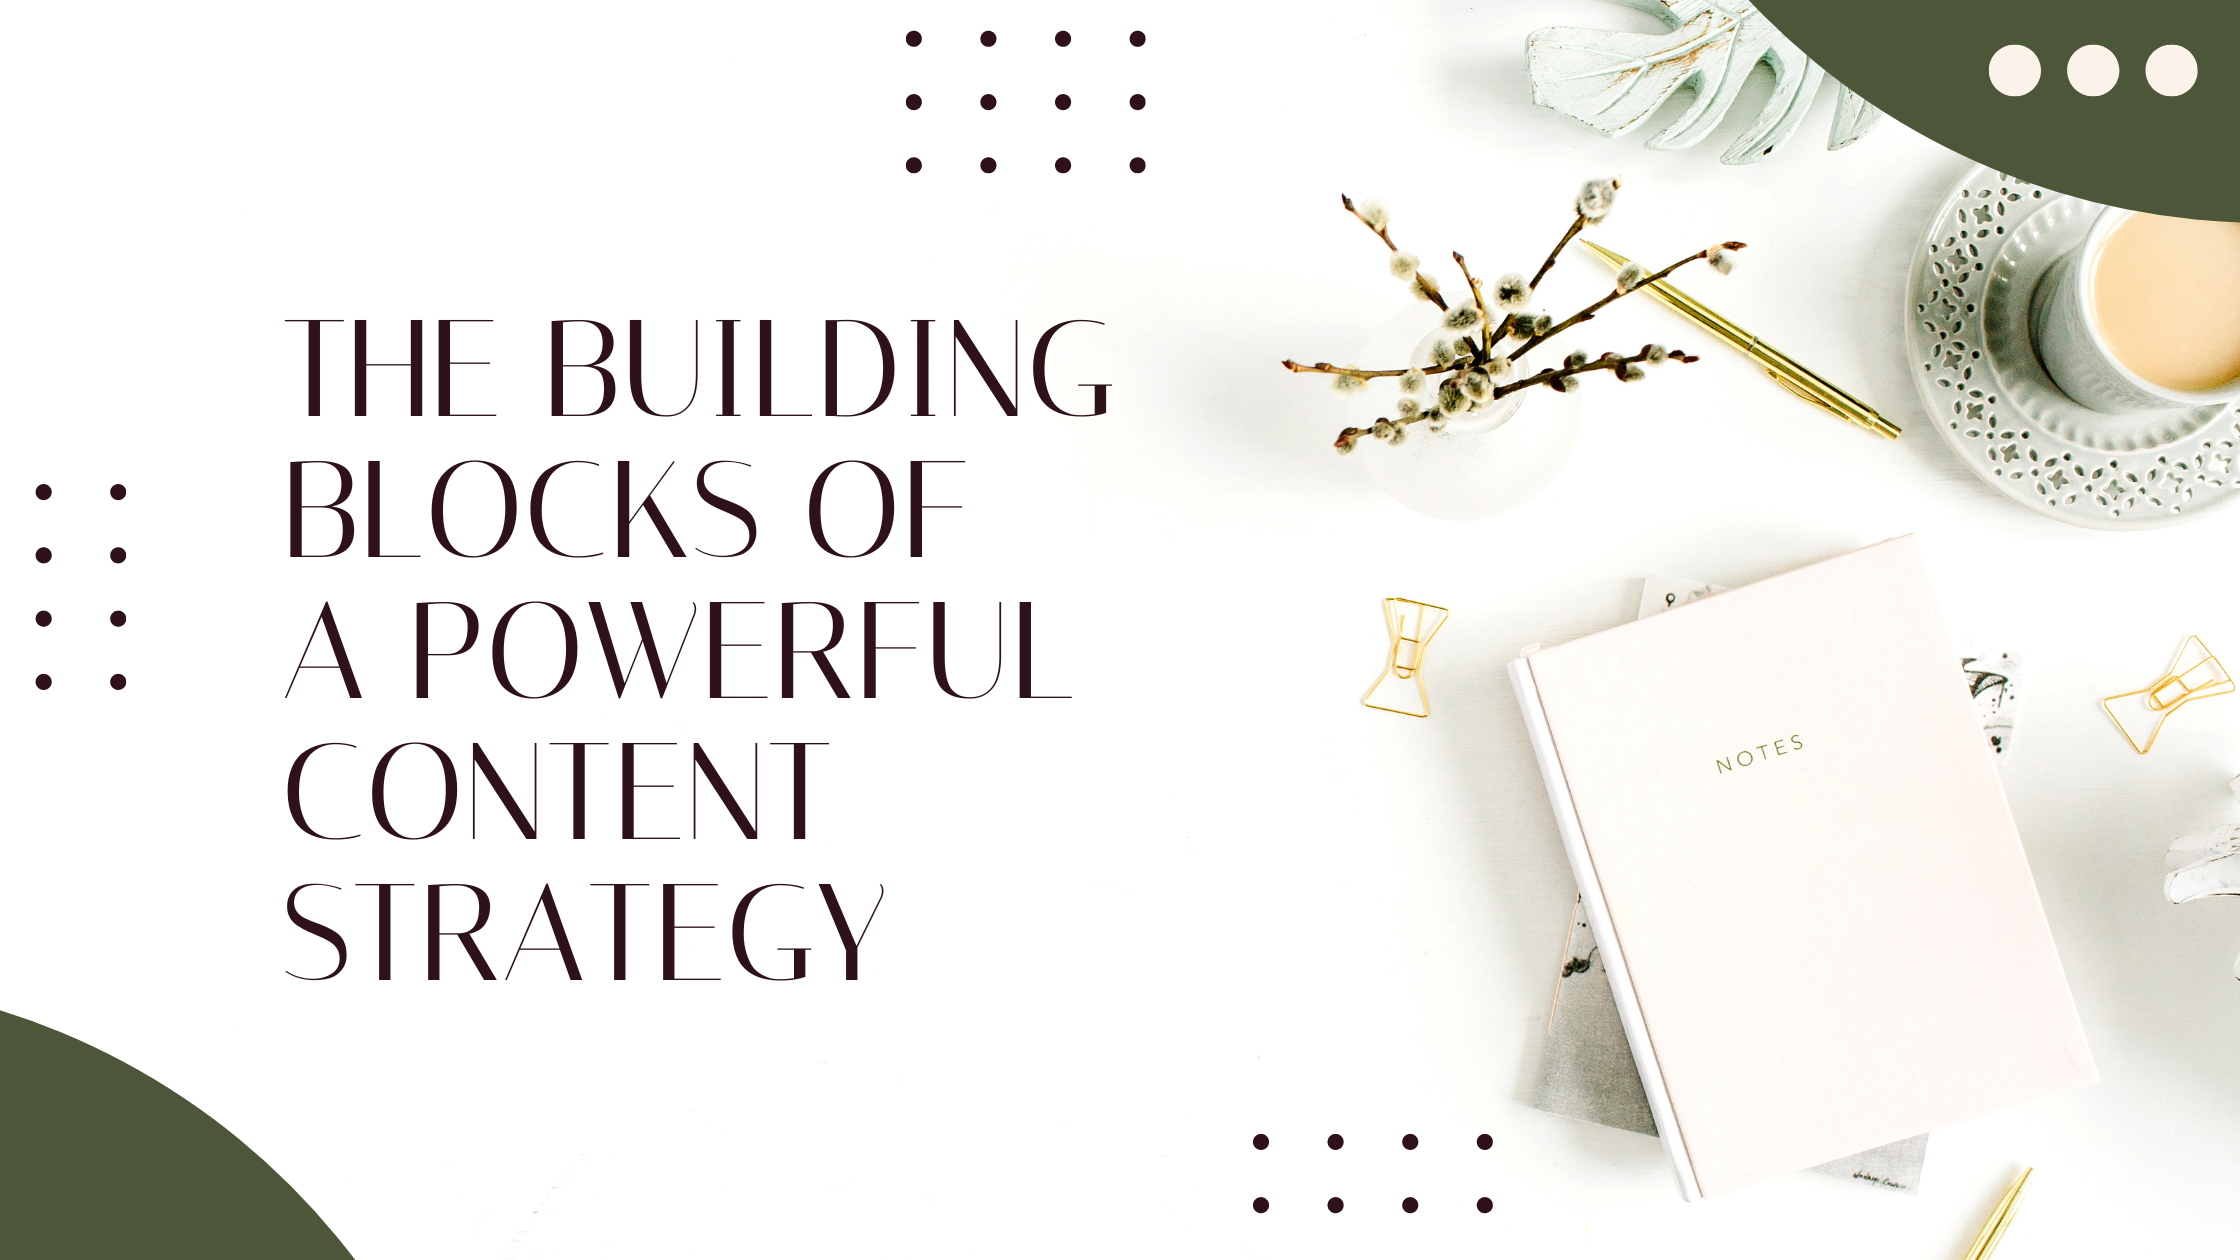 The Building Blocks of a Powerful Content Strategy